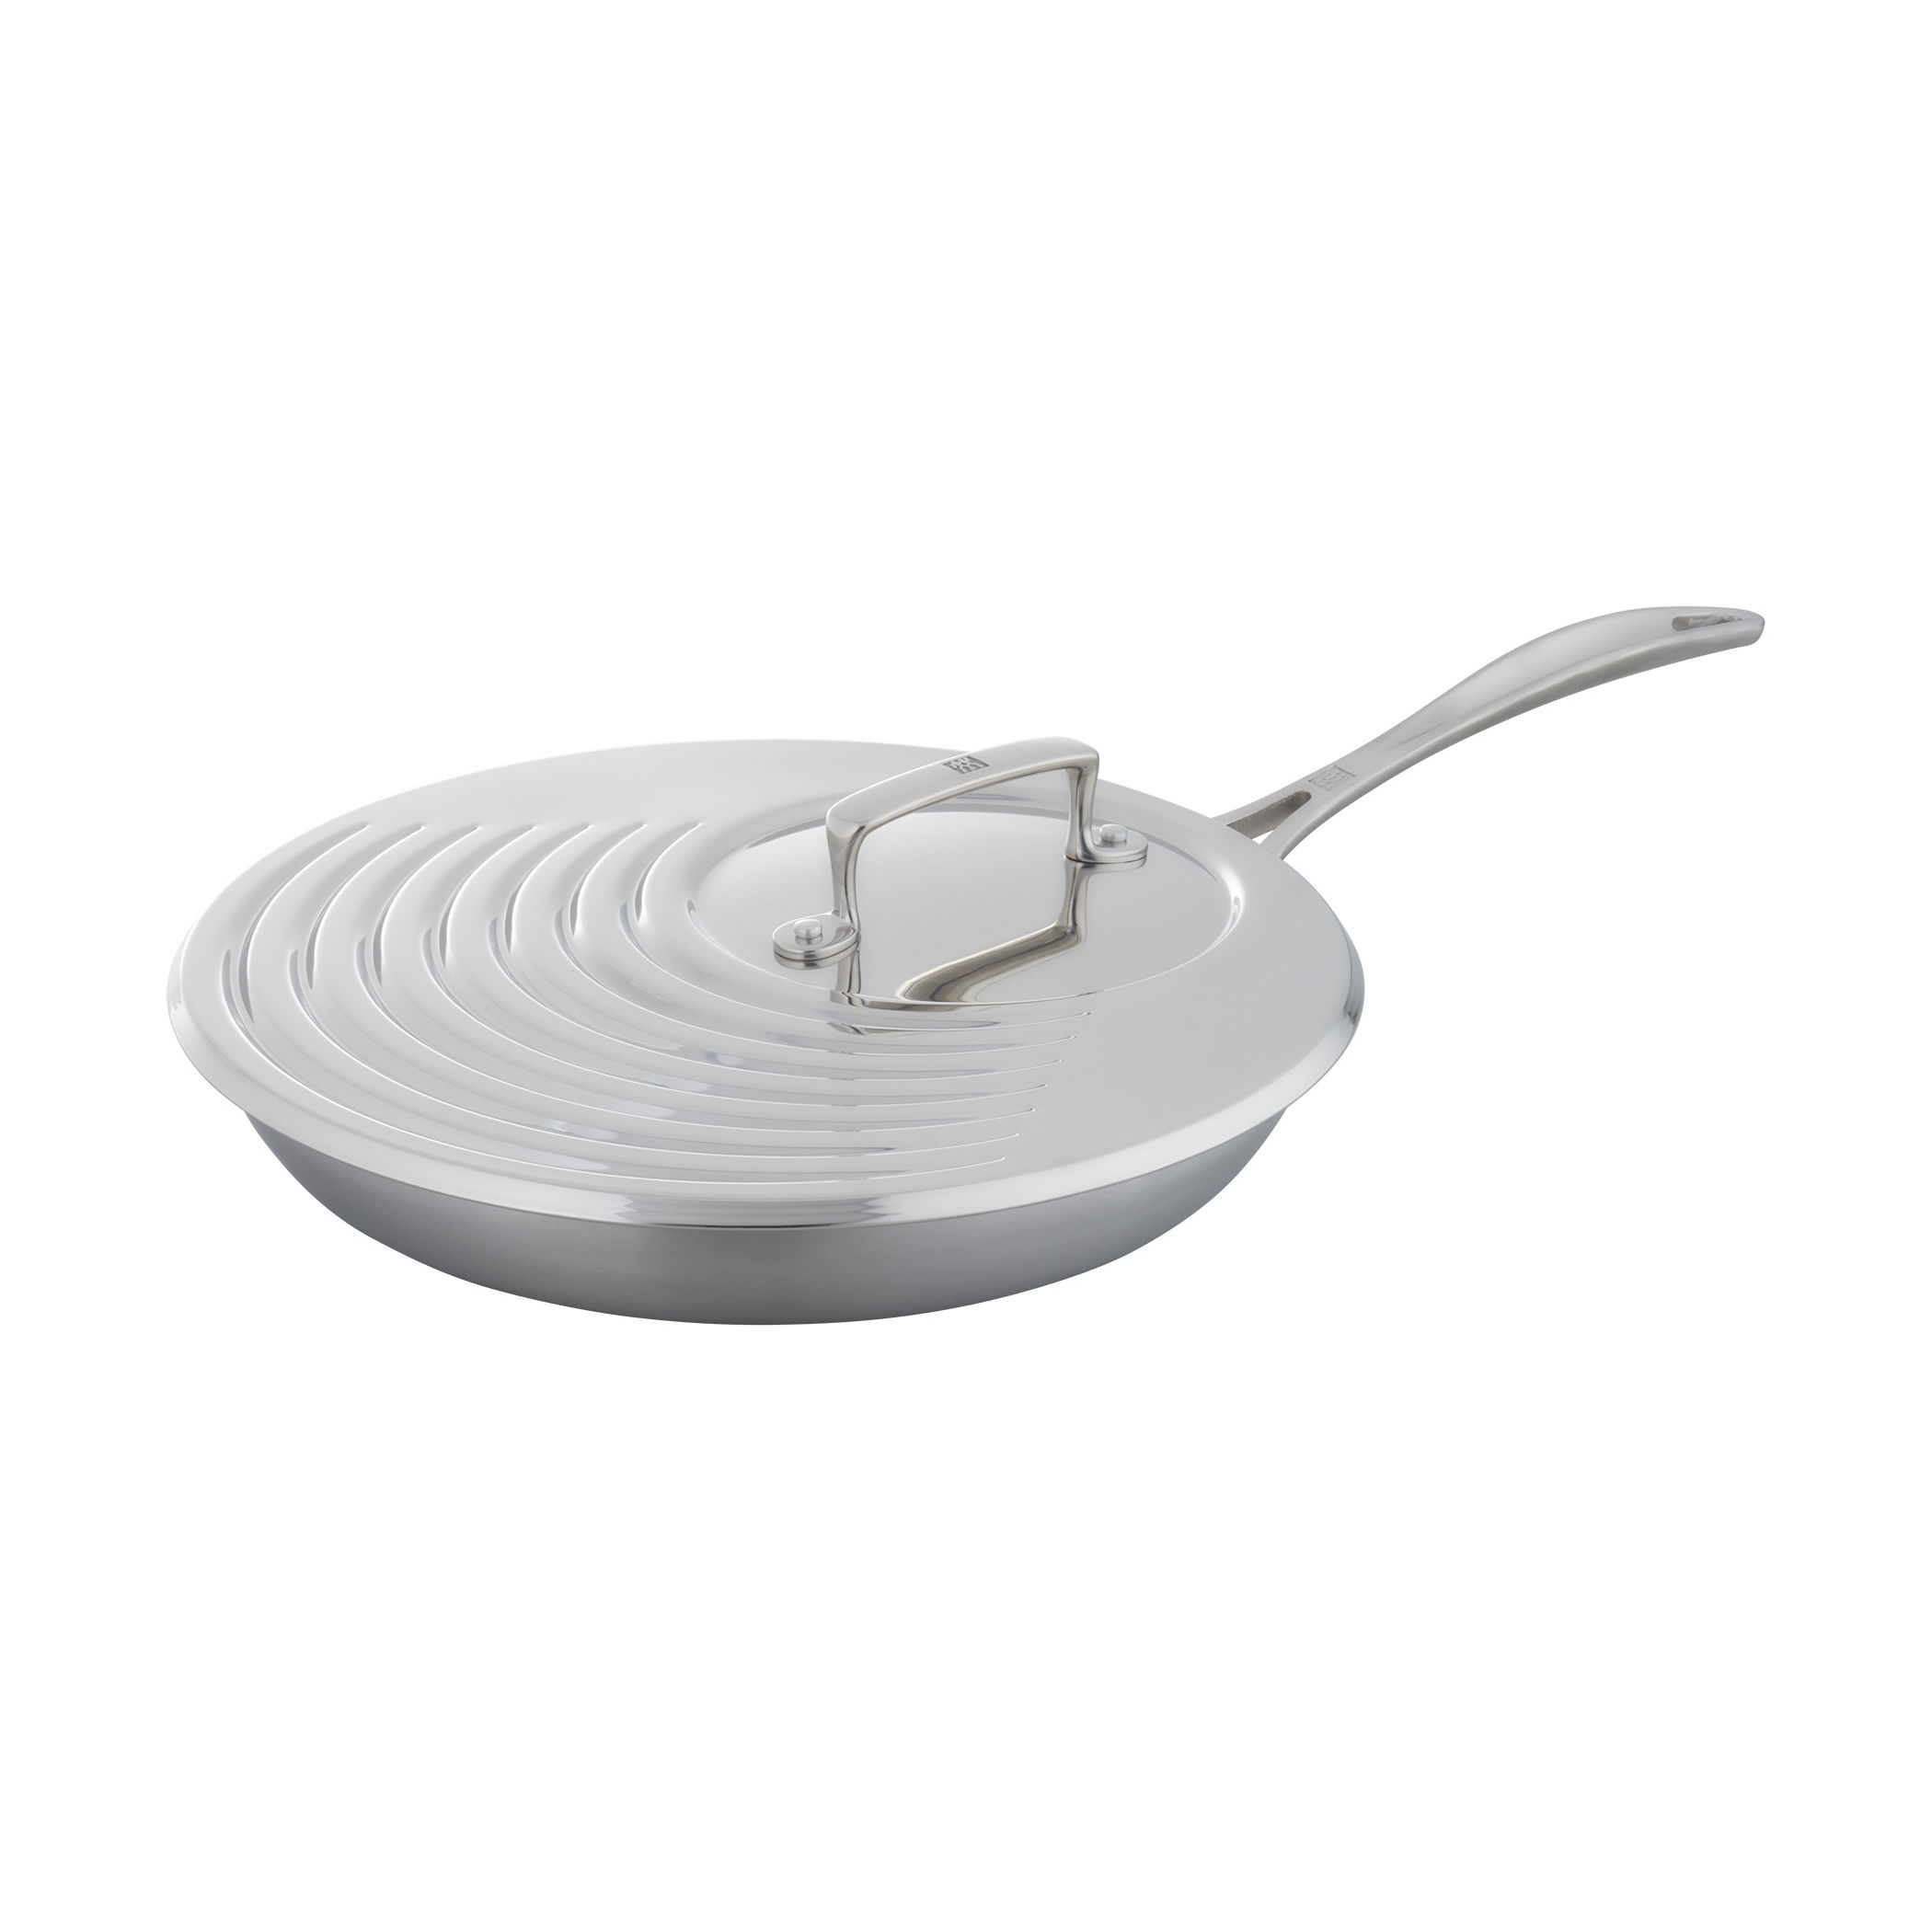 UNIVERSAL NONSTICK EVERYDAY PAN + GLASS LID – CACEROLA